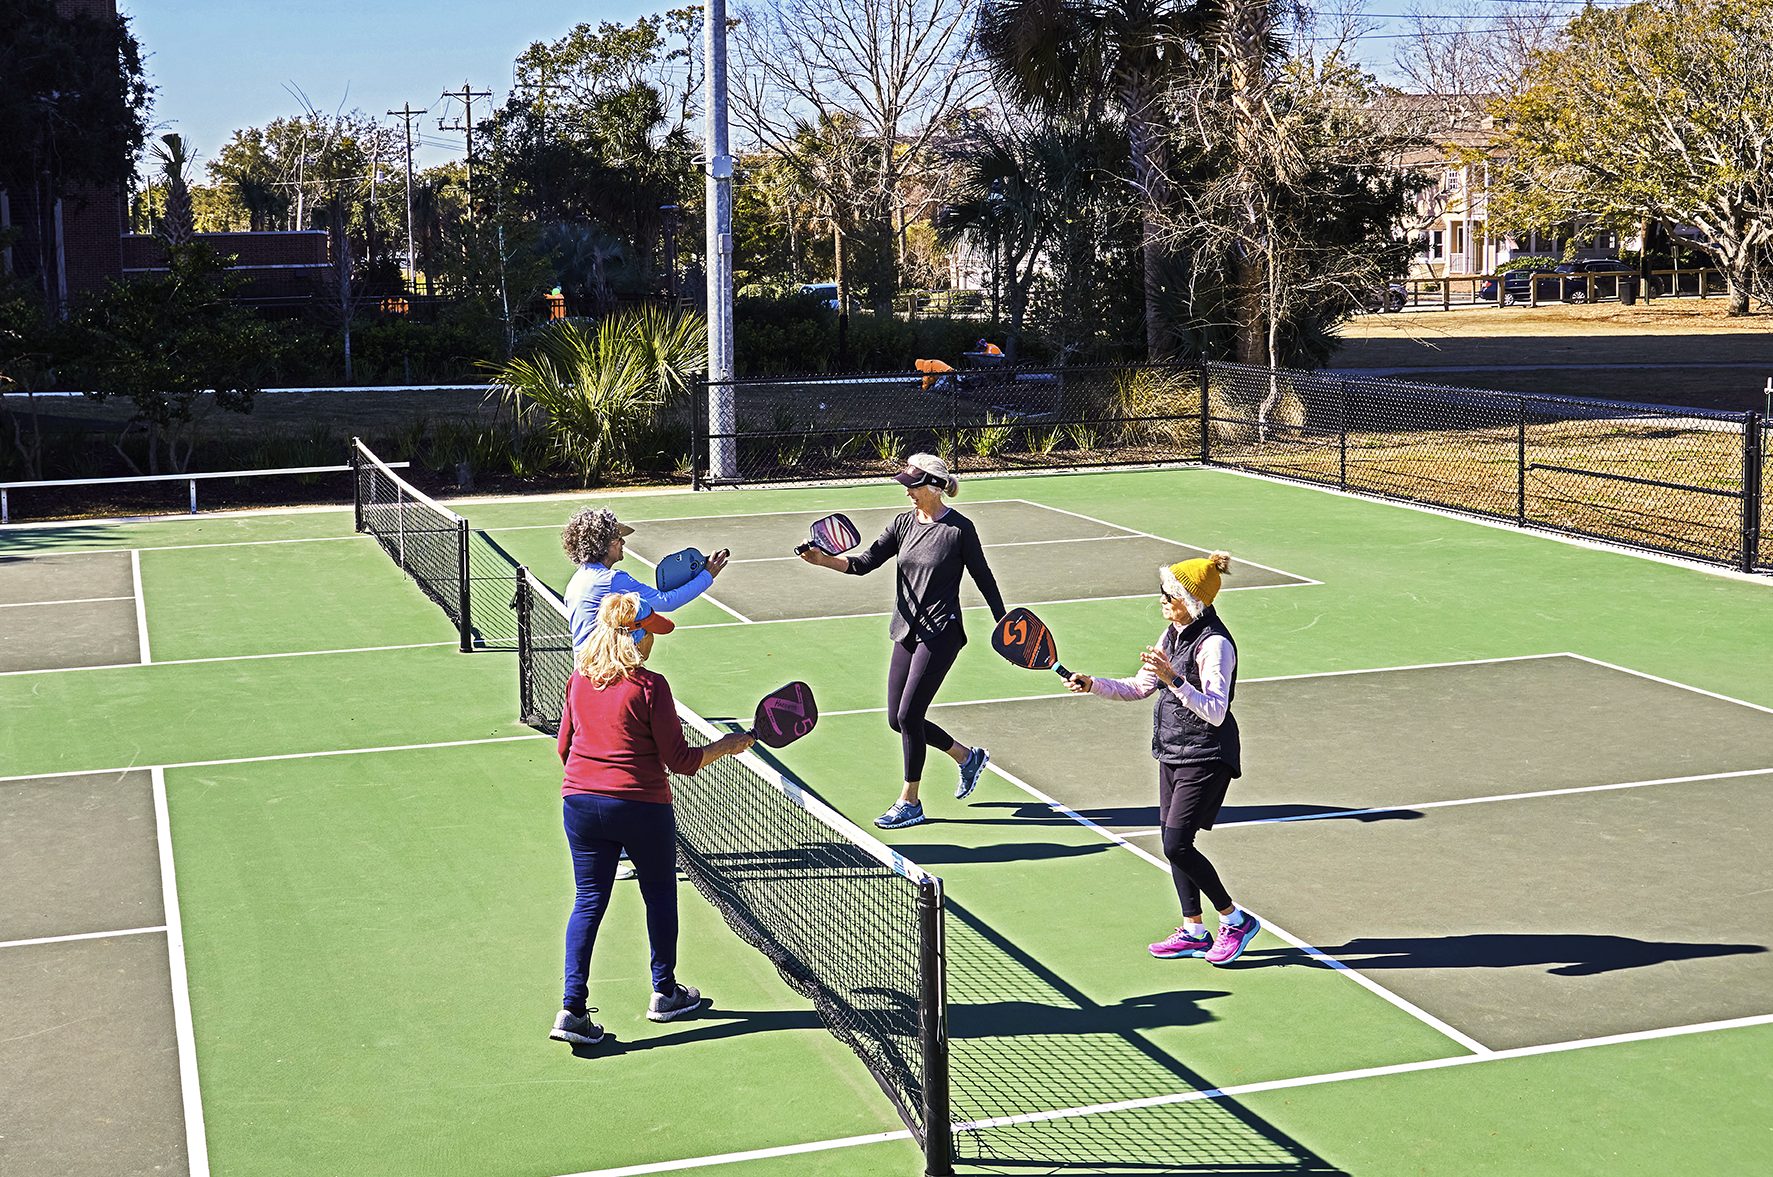 InPickleball | Pickleball Players at Moultrie Playground Public Courts, Charleston, SC